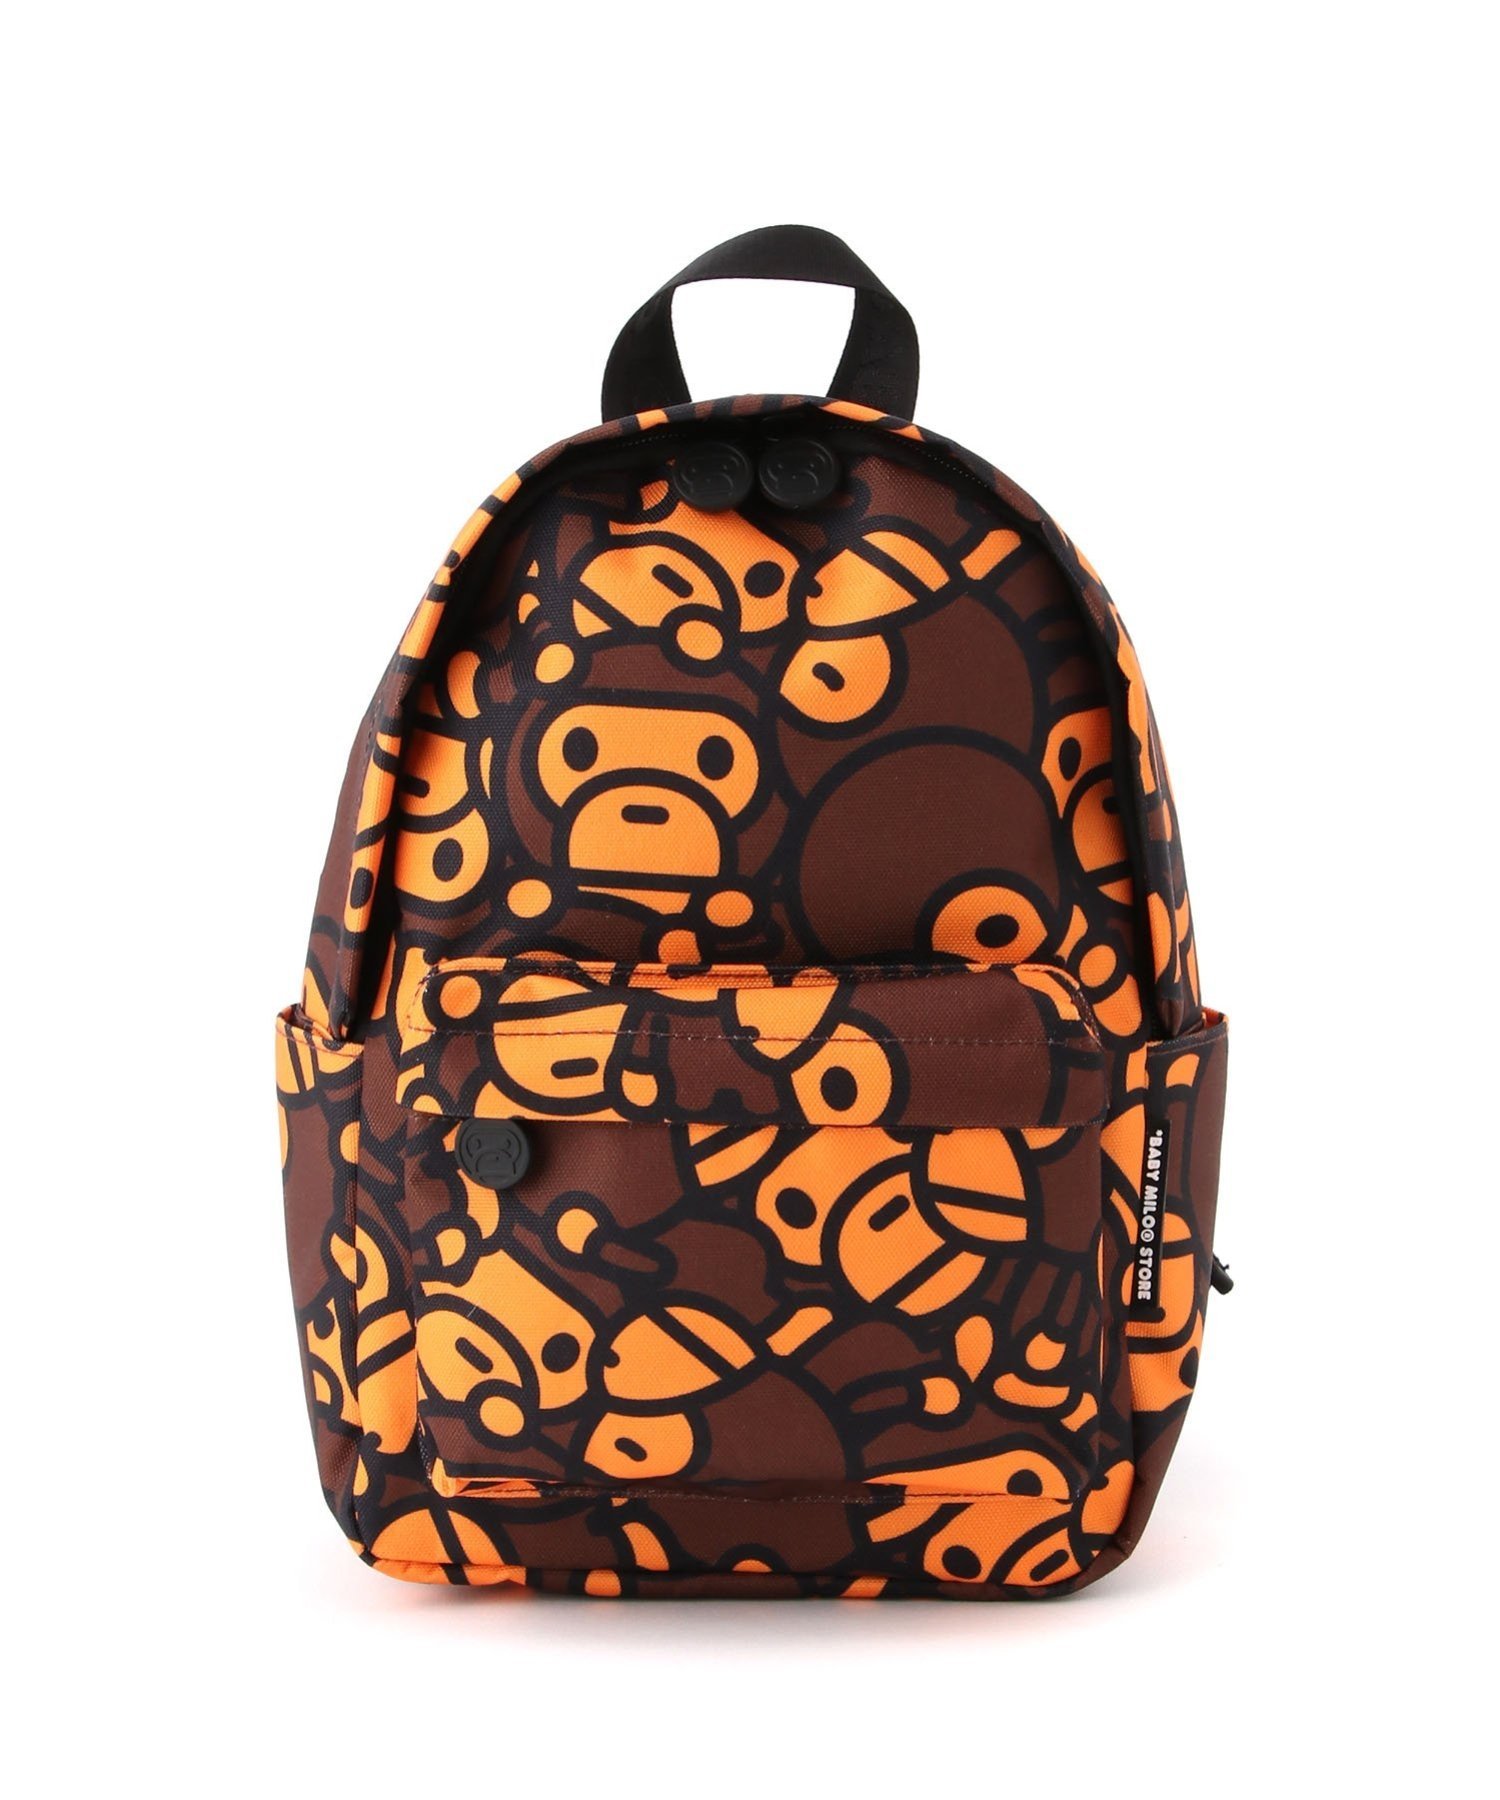 A BATHING APE ALL BABY MILO MINI BACKPACK ア ベイシング エイプ バッグ リュック バックパック ブラウン【送料無料】